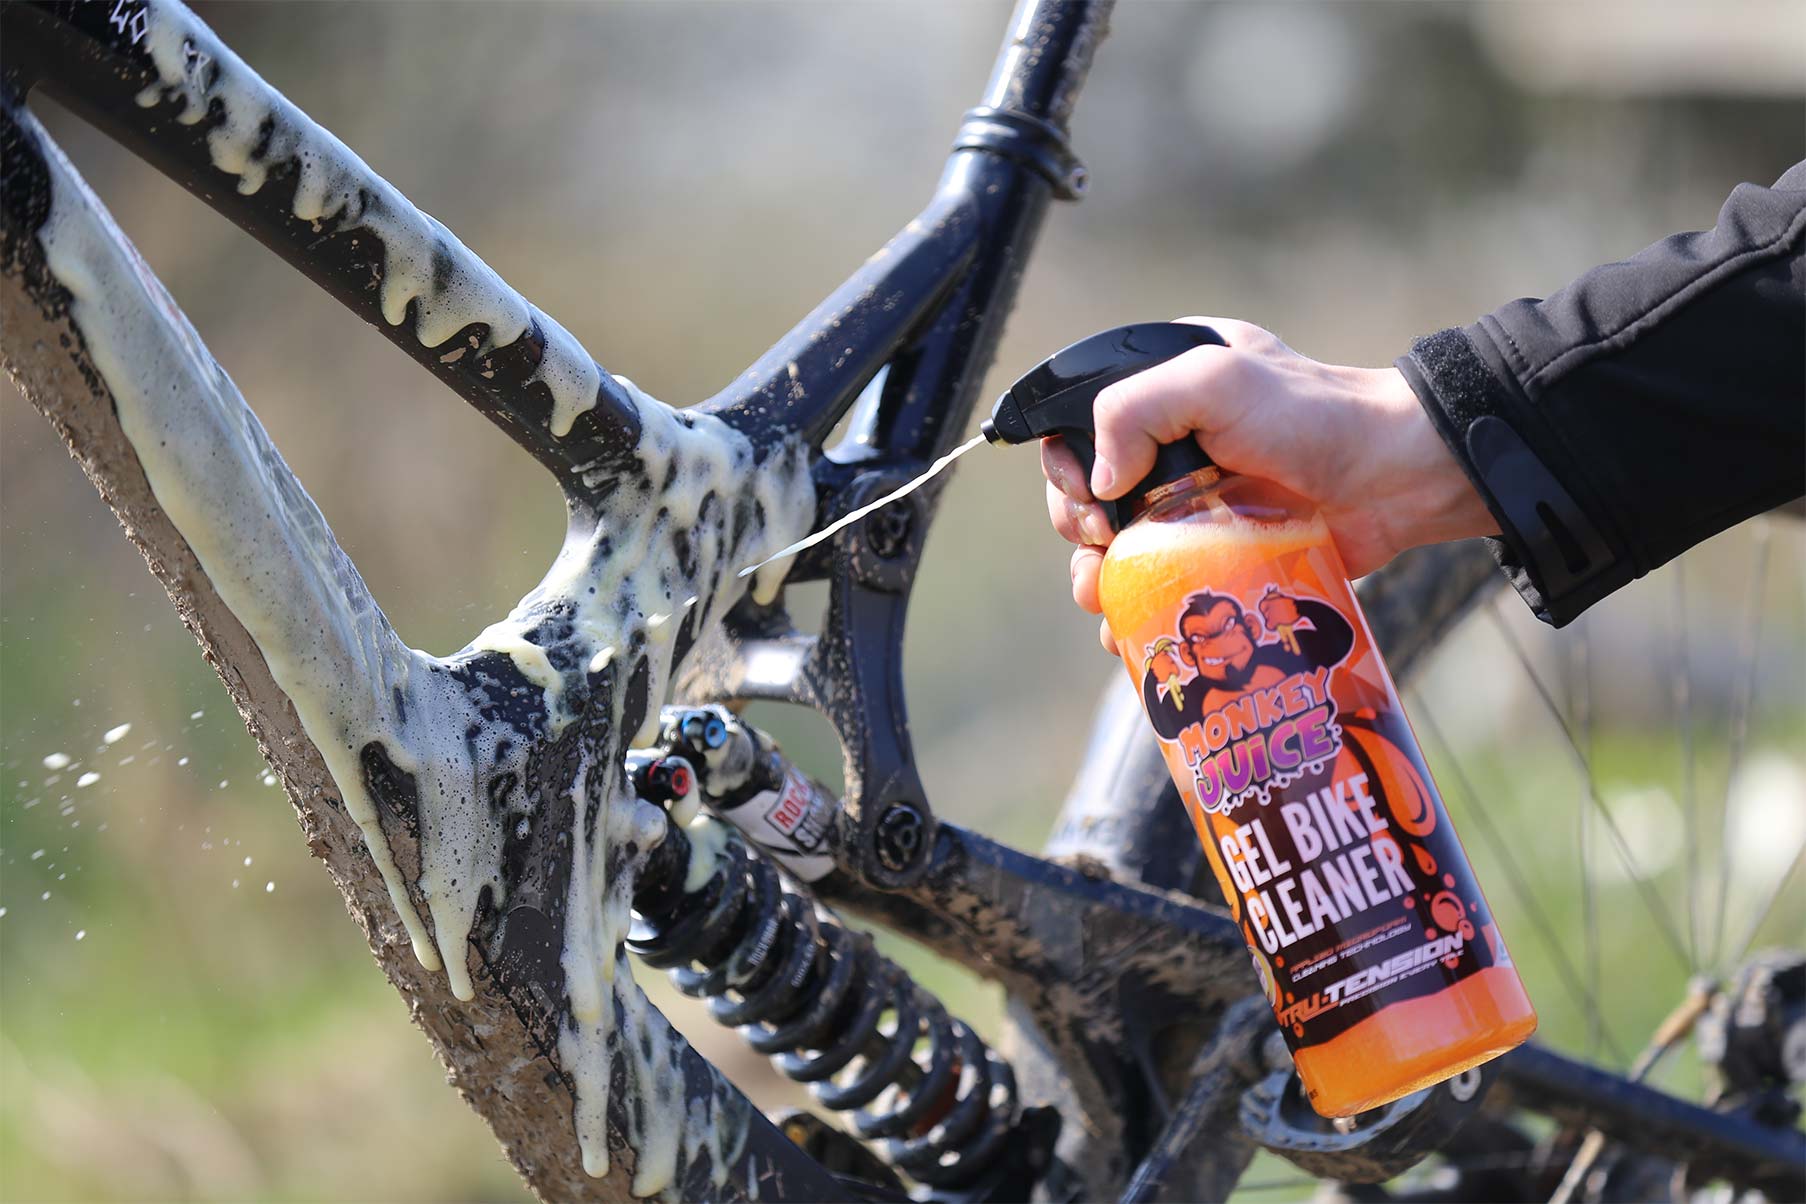 bike cleaning products